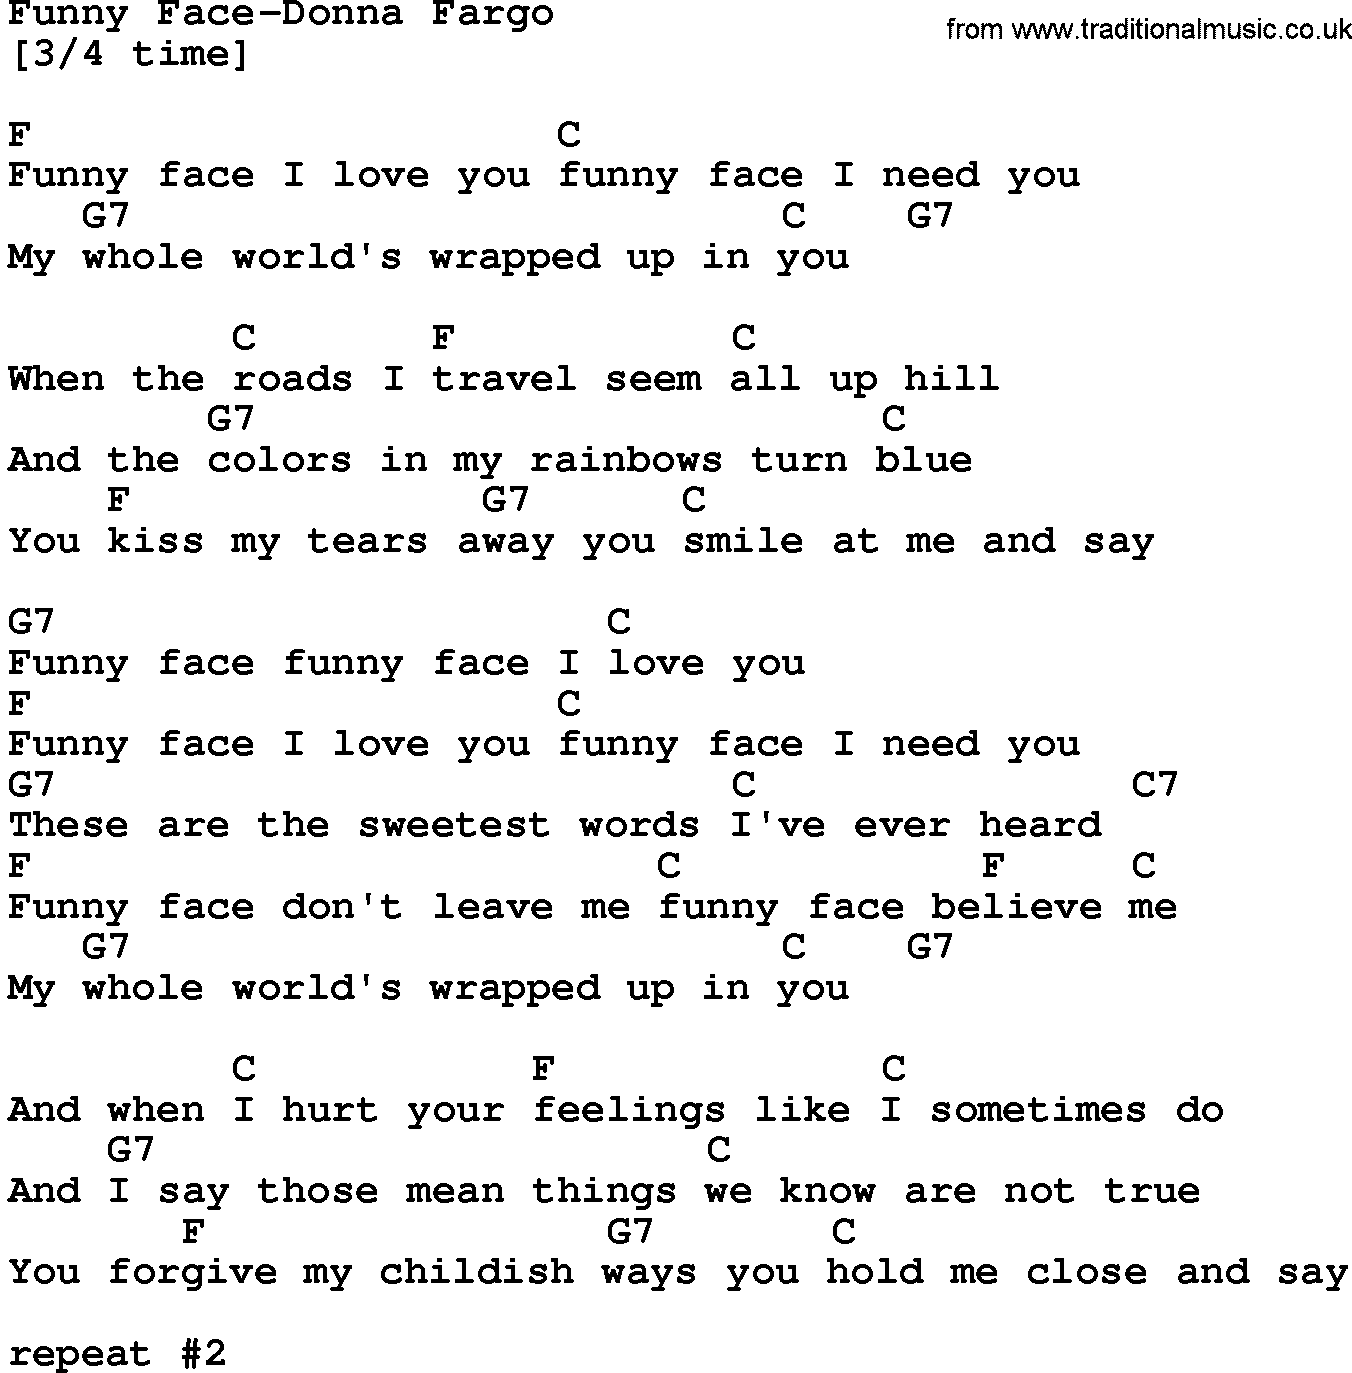 Country music song: Funny Face-Donna Fargo lyrics and chords